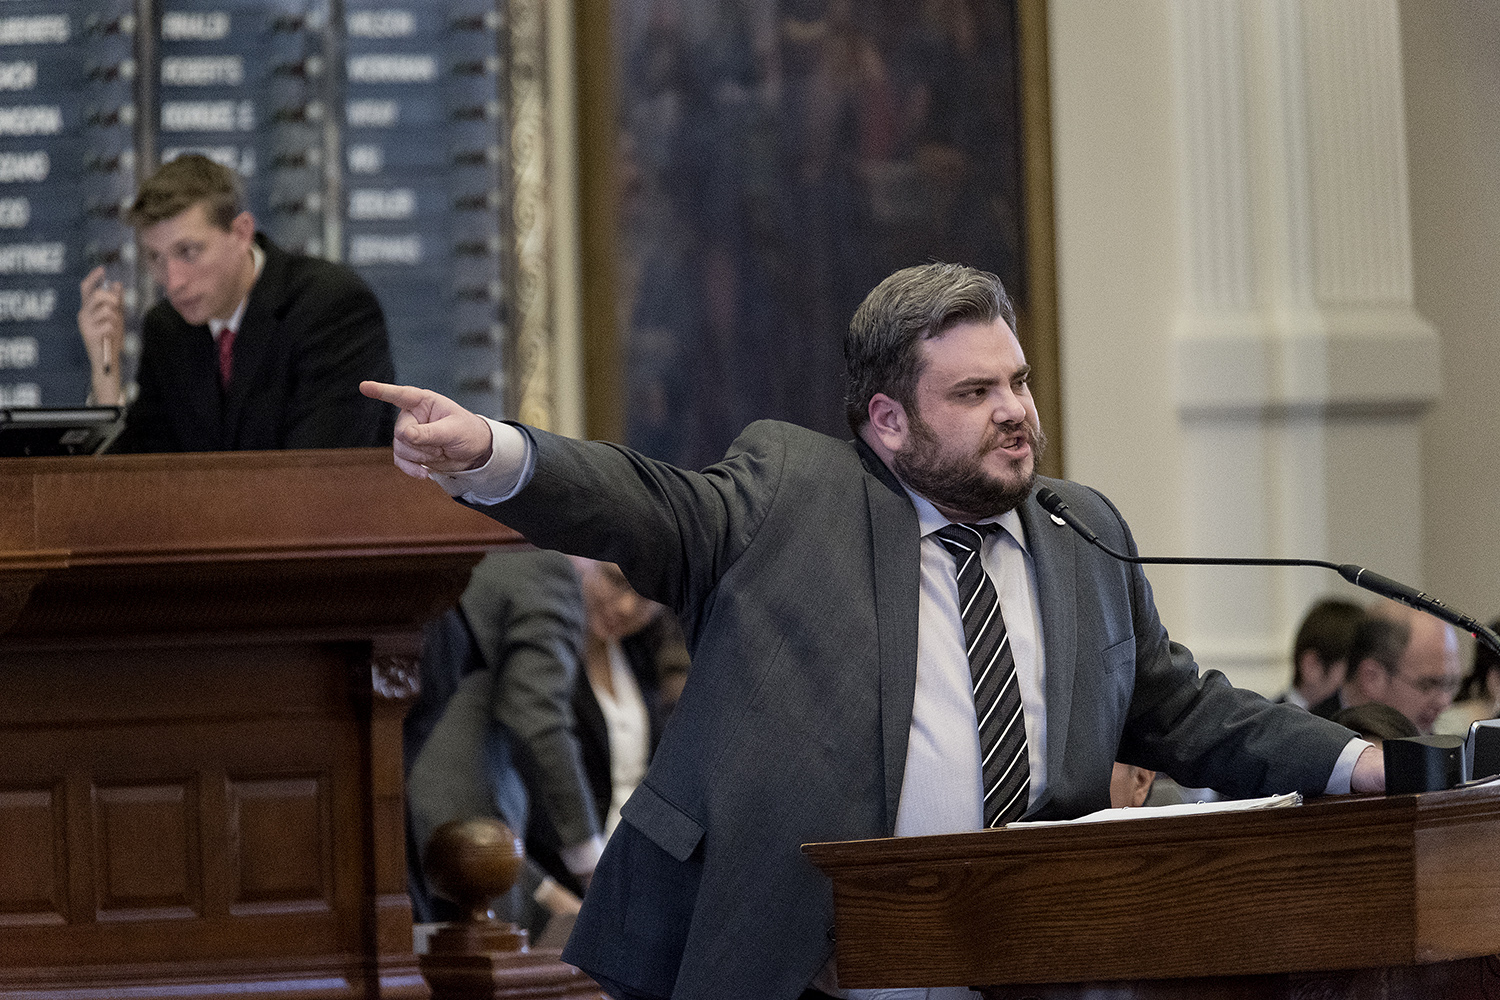 An early moment of contention arose after state Rep. Sergio Muñoz, D-Palmview, passed an amendment to strip $43 million from the governor’s Texas Enterprise Fund. Here, Rep. Jonathan Stickland, R-Bedford, delivers an angry speech denouncing the vote.